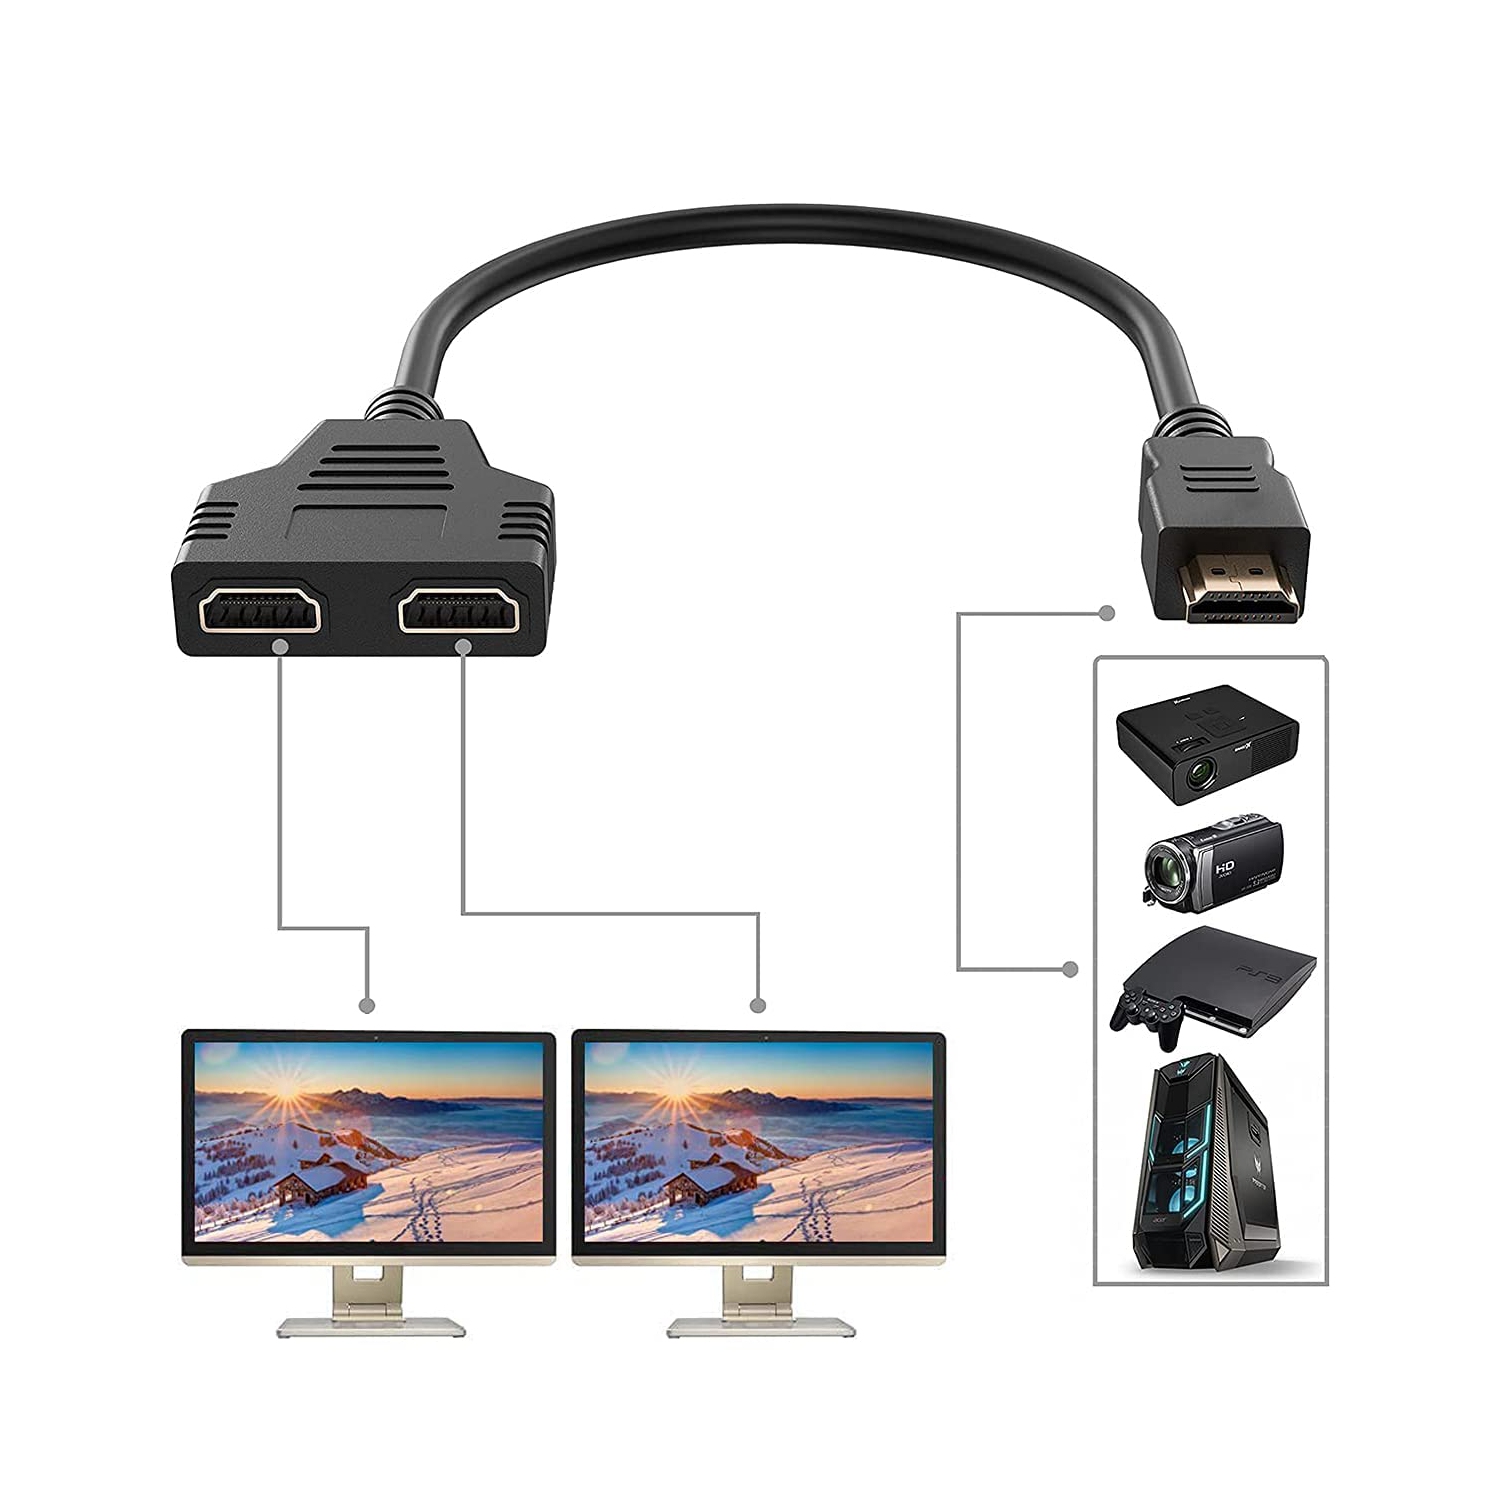 HDMI Splitter Adapter1080P HDMI Male to Dual HDMI Femal 1 to 2 Way HDMI Splitter Adapter Cable for HDTV HD, LED,LCD Monitor and Projectors - Free Shipping